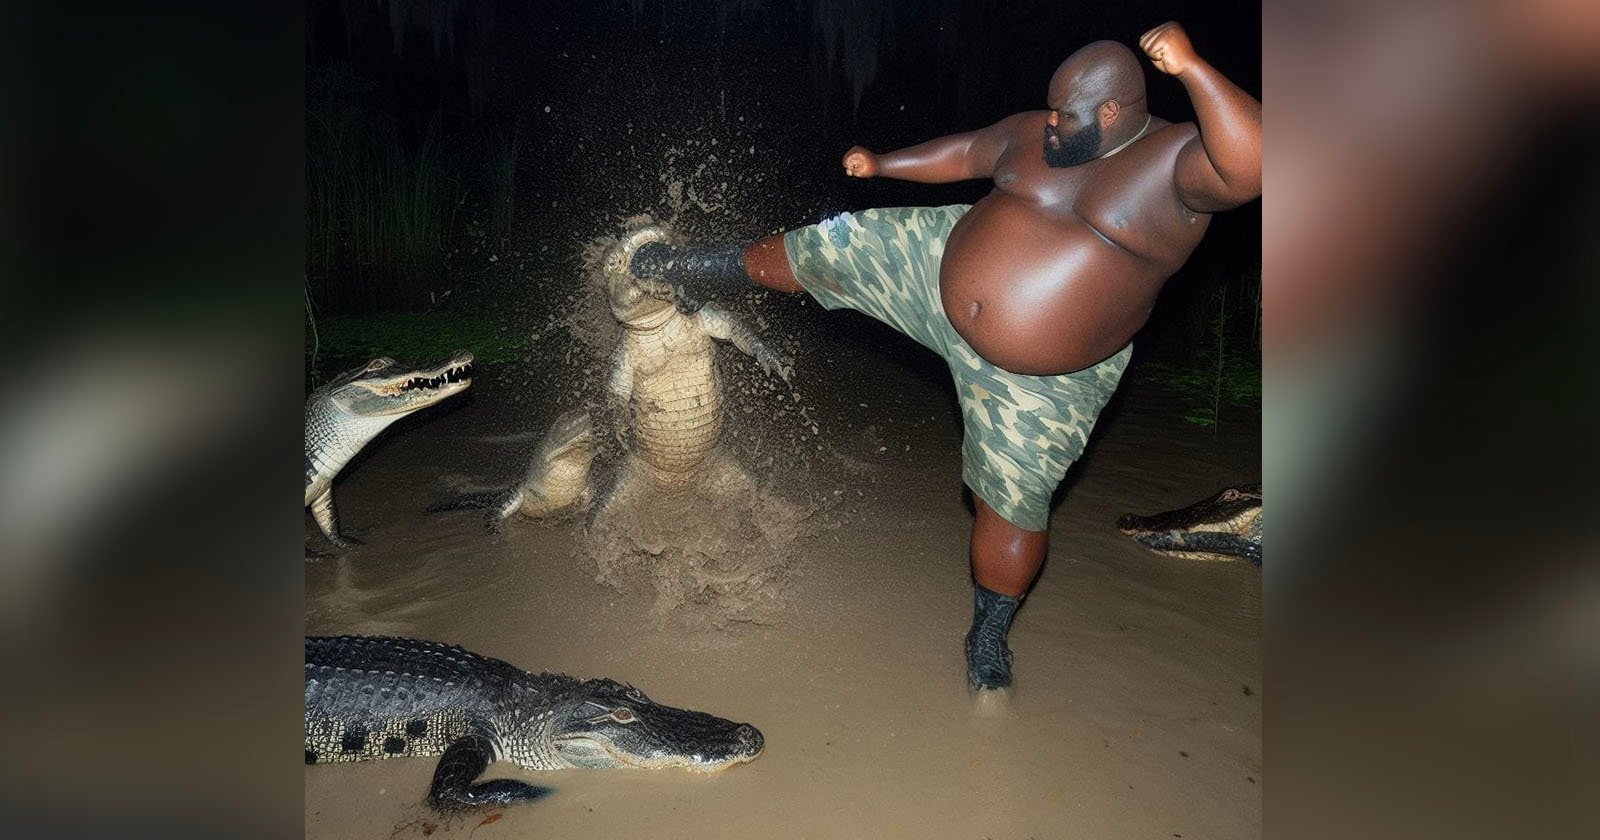 Internet Fooled by Viral AI Image of Man Fighting an Alligator